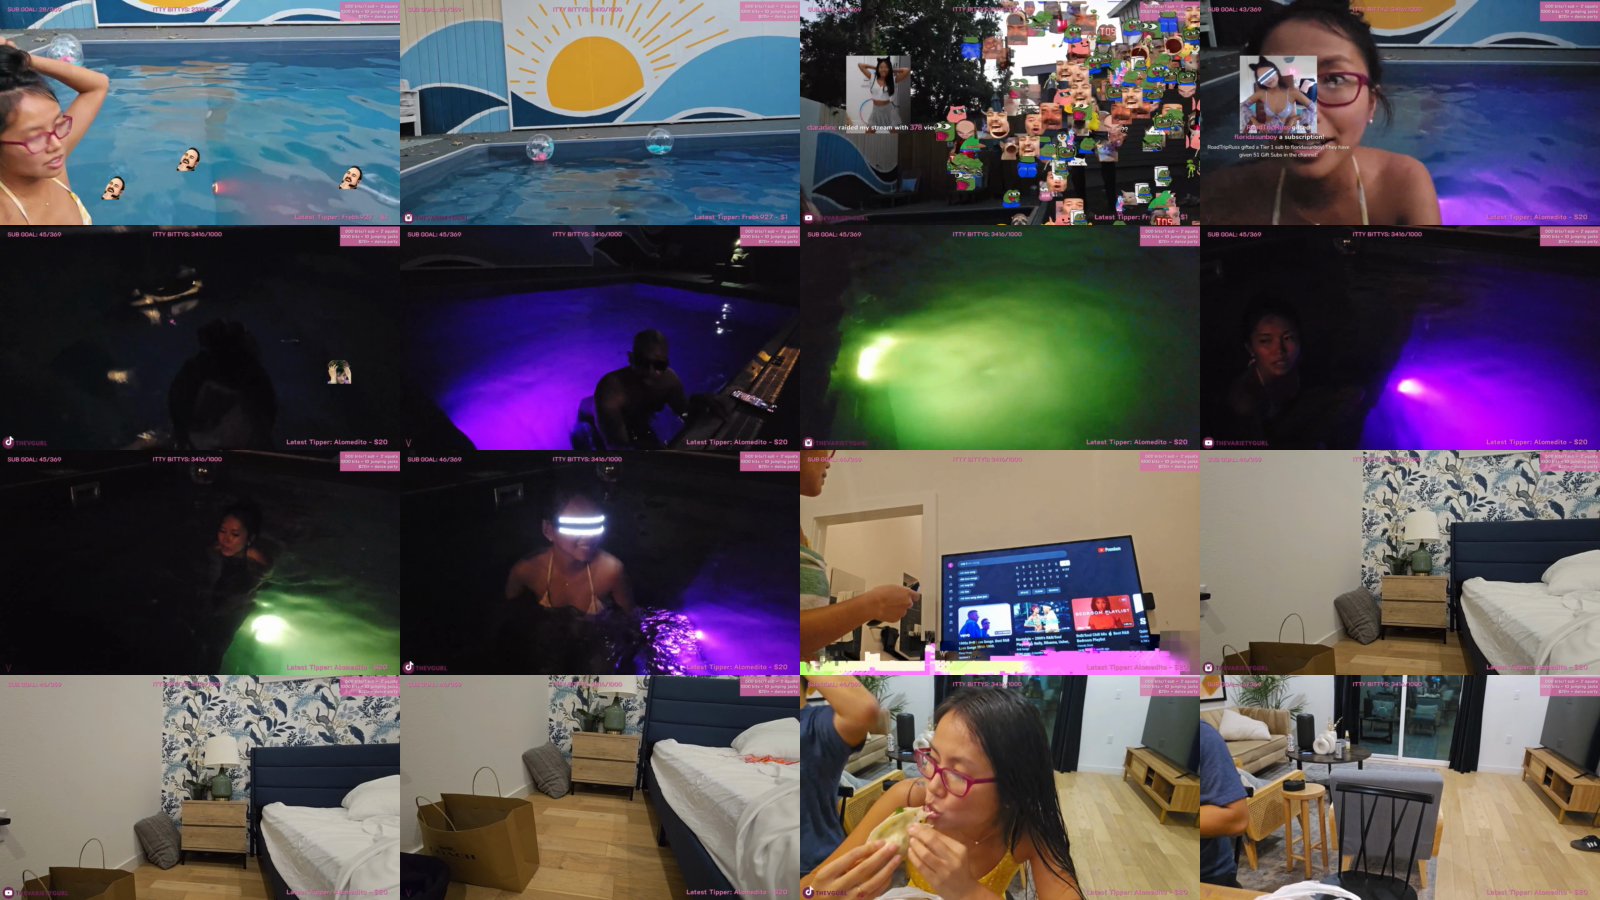 20240608-Thevarietygurl-Twitch-Pool-02-UyOkMOy7.mp4_grid.png